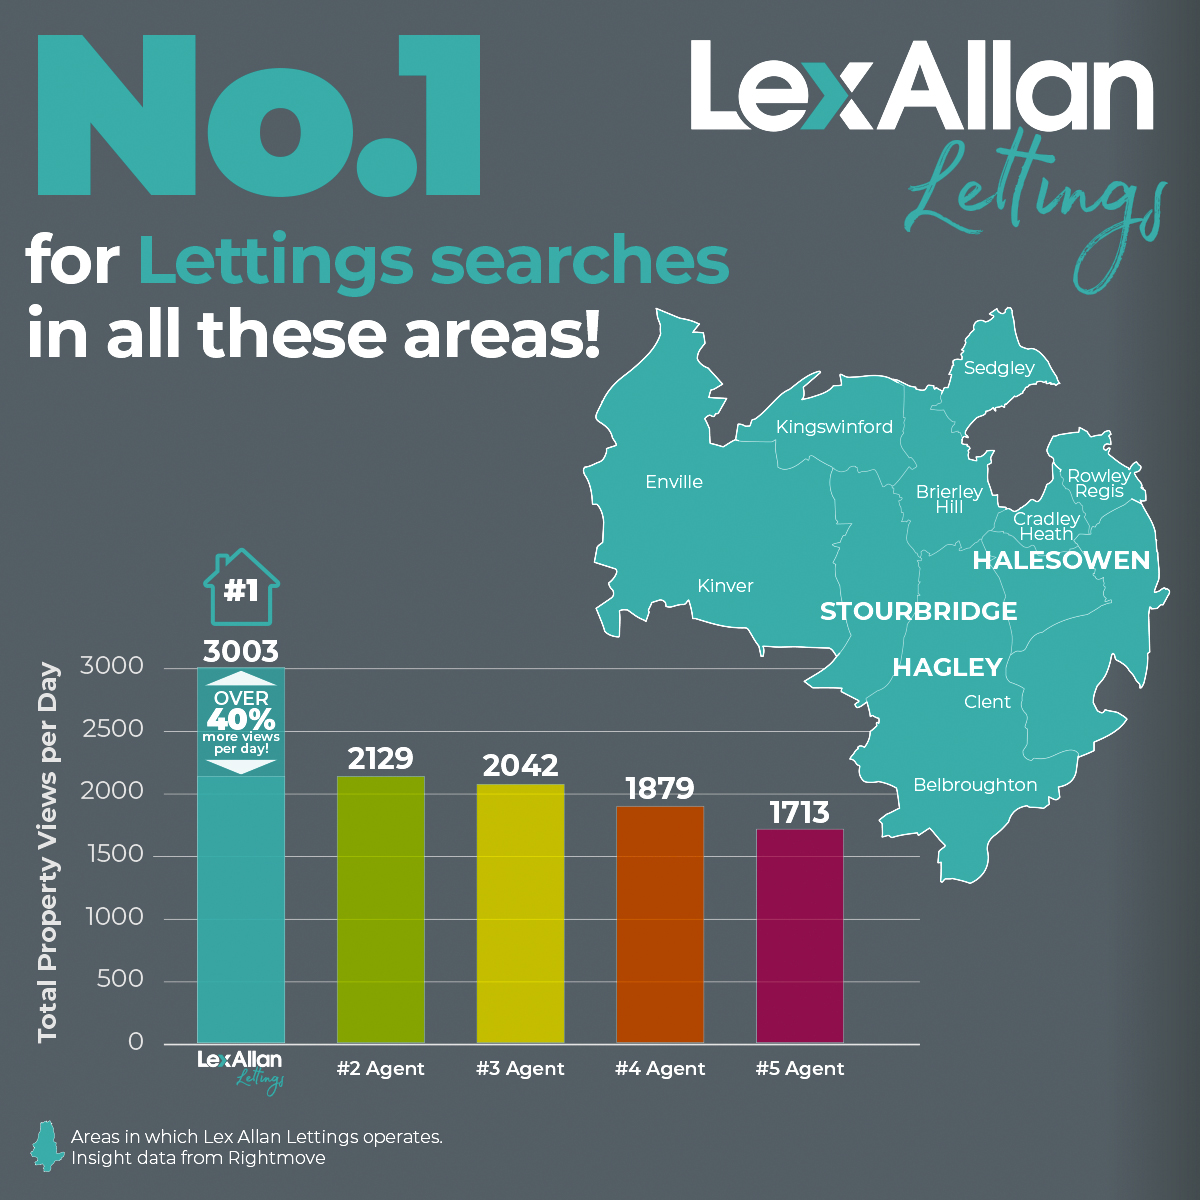 Landlords! We are No. 1 for #propertysearches!
#Rightmove’s latest figures show that we hold top spot in every area we operate with 41% more views than our nearest rival!
#HomesToLet #Property #Lettings #LettingAgents #Stourbridge #BlackCountry #Birmingham
lexallan.co.uk/lettings